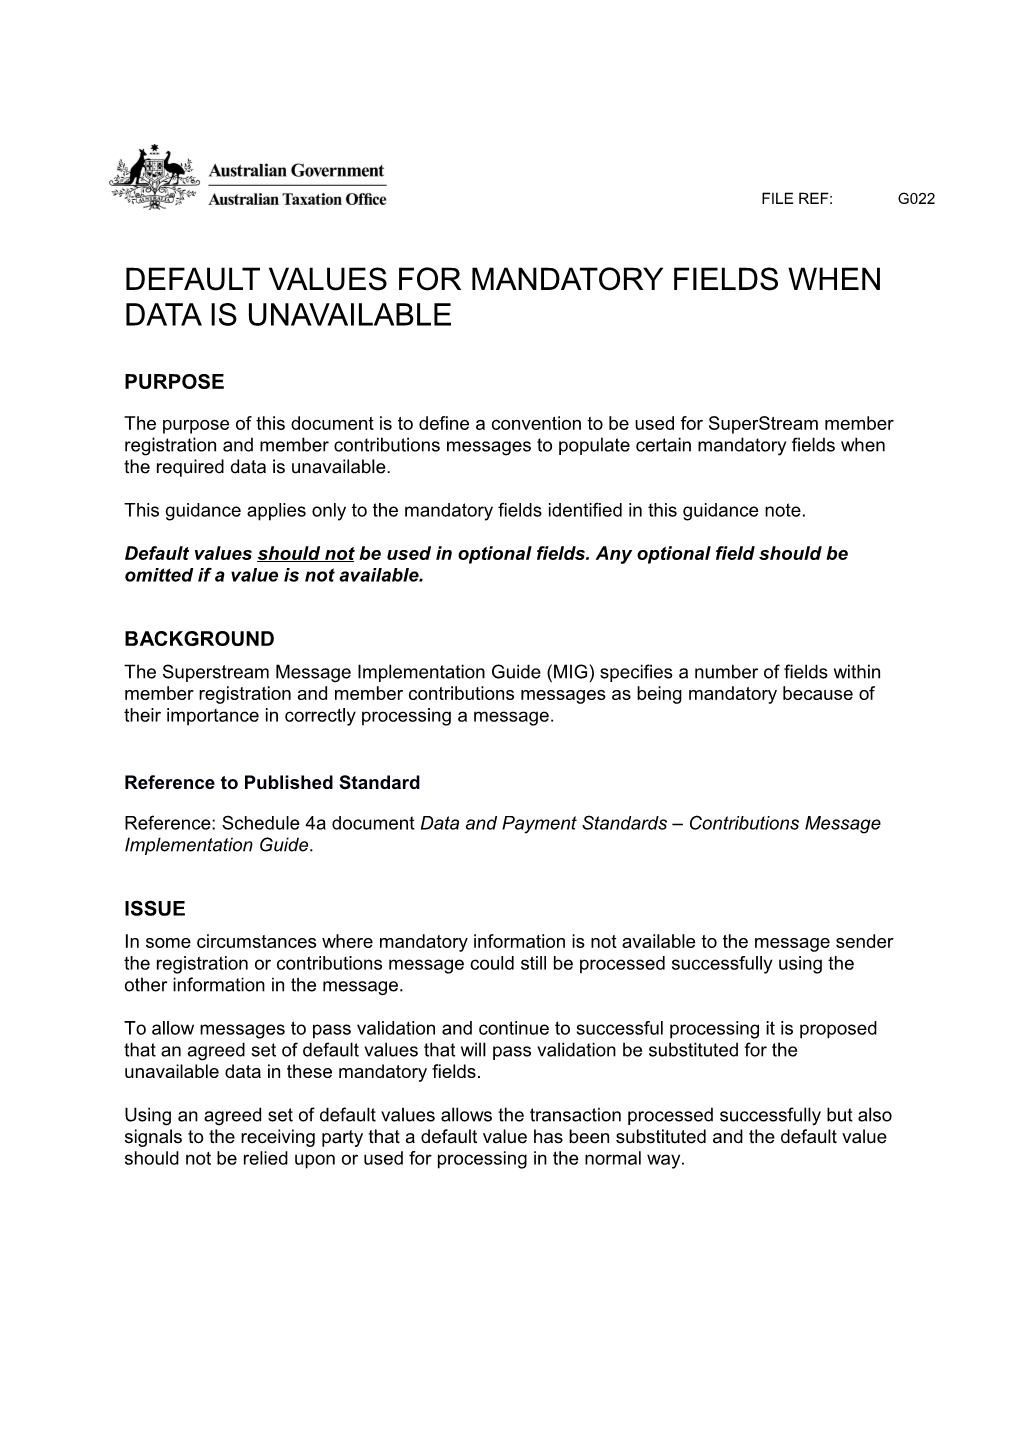 Default Values for Mandatory Fields When Data Is Unavailable